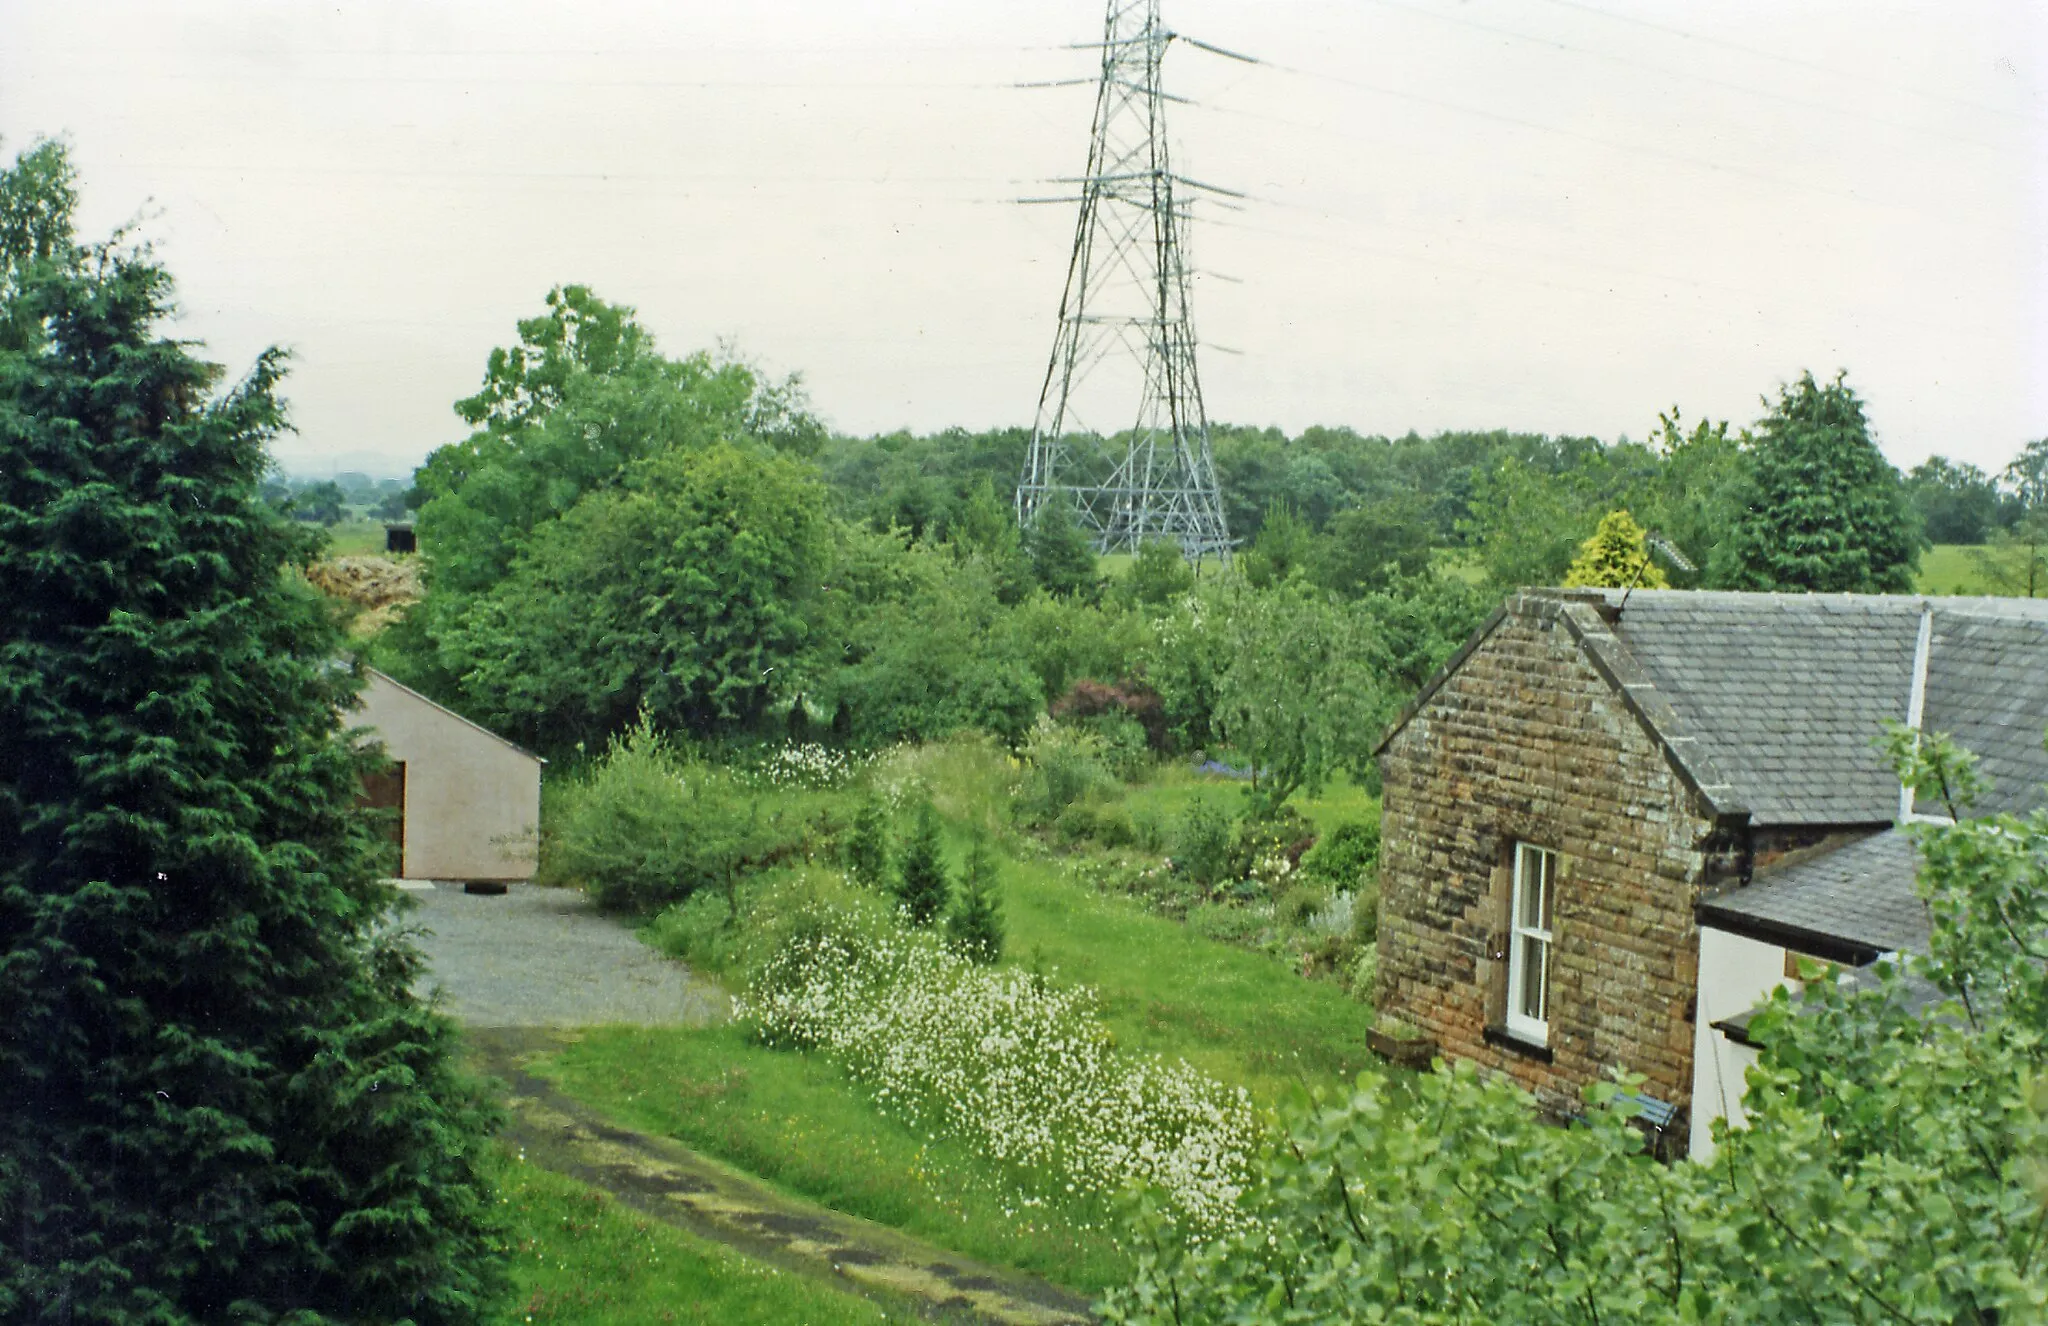 Photo showing: Harker station (site/remains), 1997.
View northwards, towards Hawick and Edinburgh: ex-NBR Edinburgh - Carlisle main line (Waverley Route). The station here had been closed to passengers since 1/11/29 (to goods 27/12/65), the whole line - tragically - from 6/1/69.